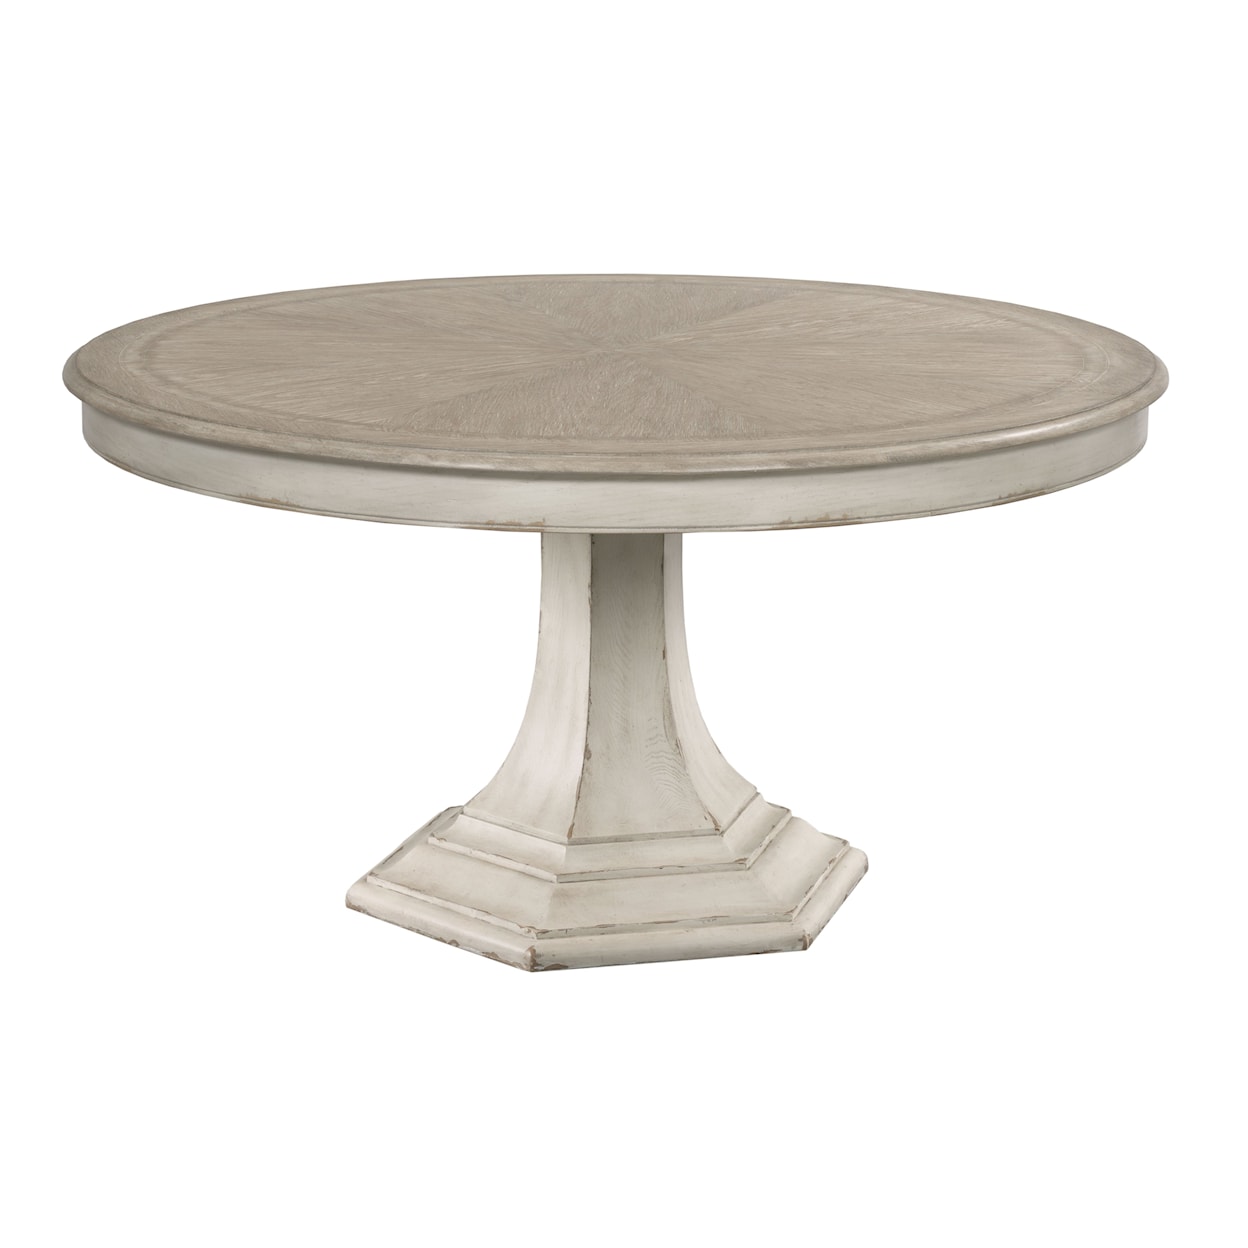 American Drew Cambric Round Dining Table